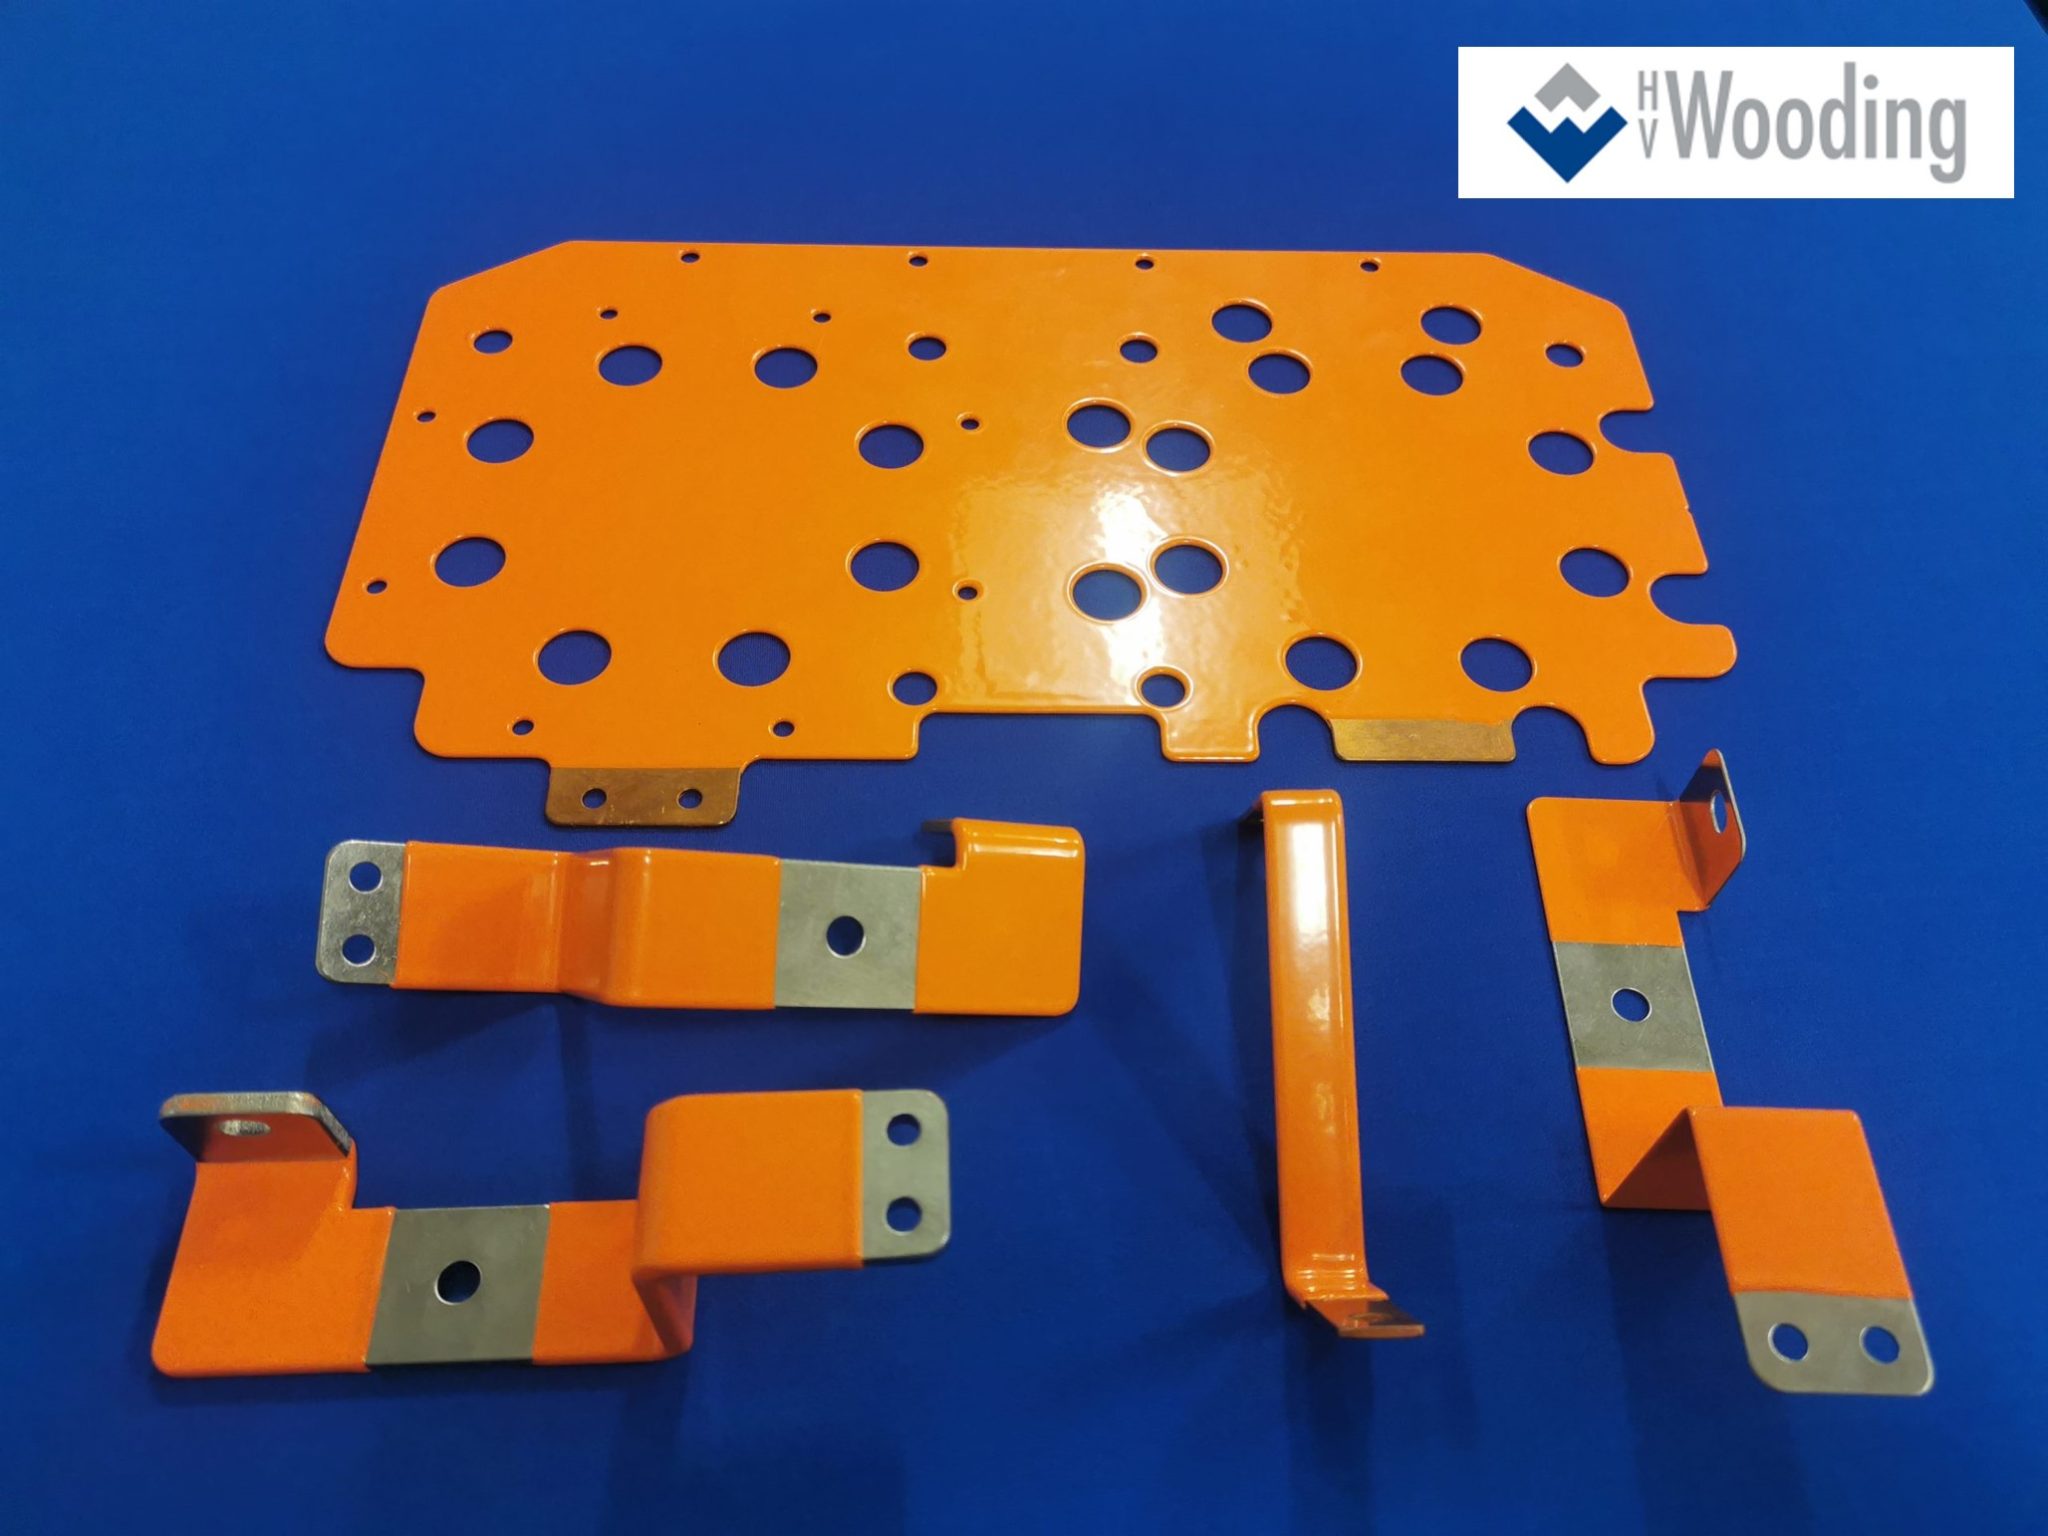 New powder coating process improves the quality & performance of Busbars from HV Wooding